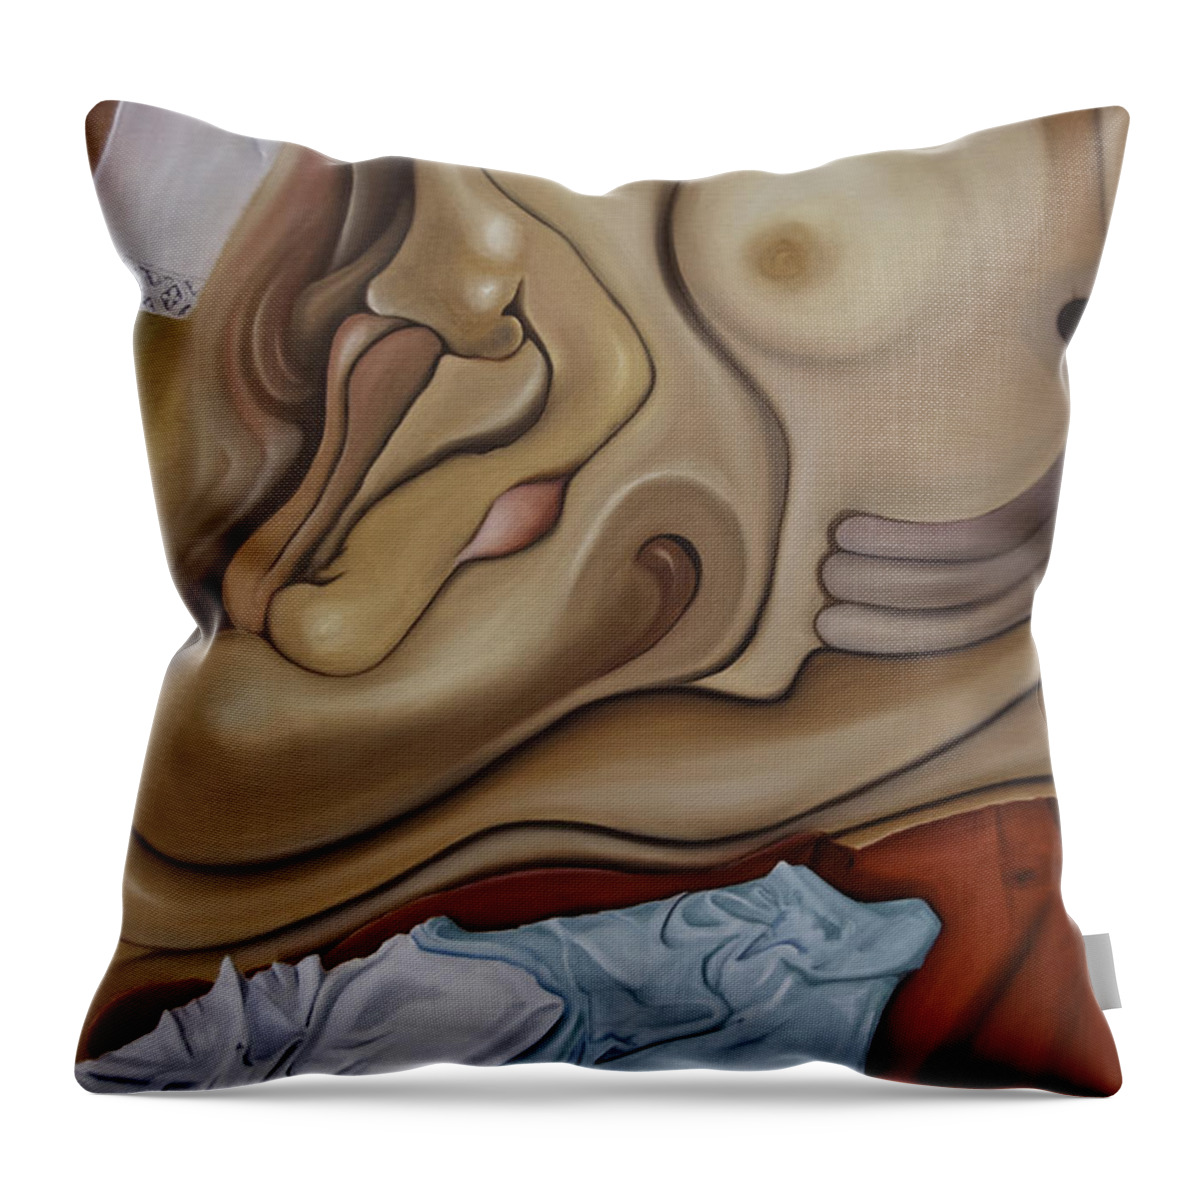 Unmade Bed Throw Pillow featuring the painting The Unmade Bed by James Lavott